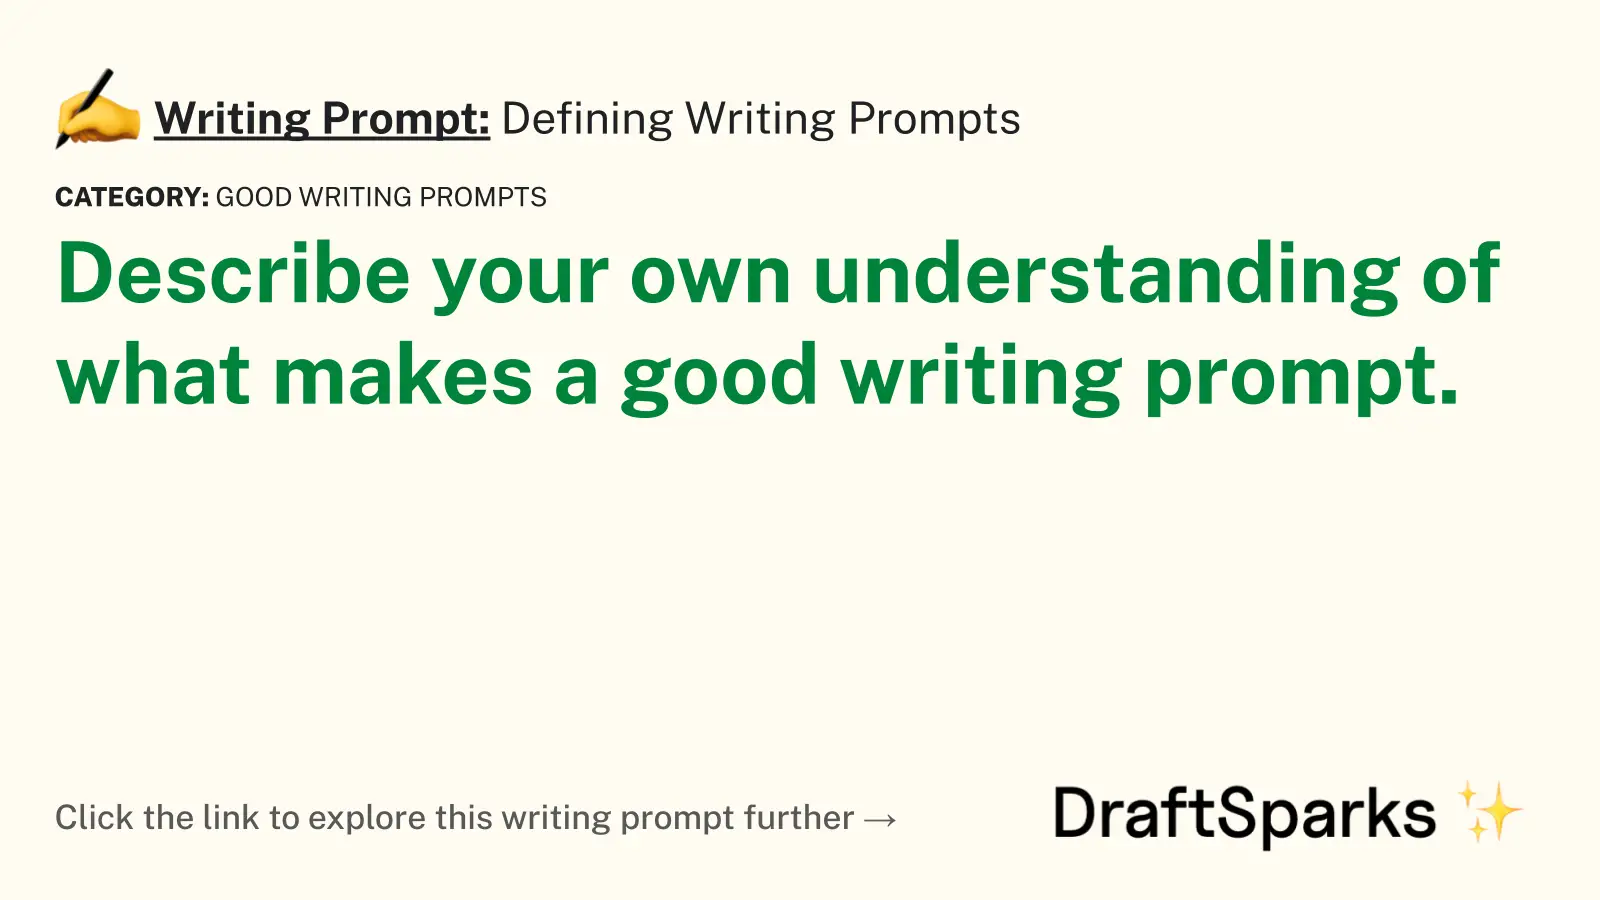 Defining Writing Prompts